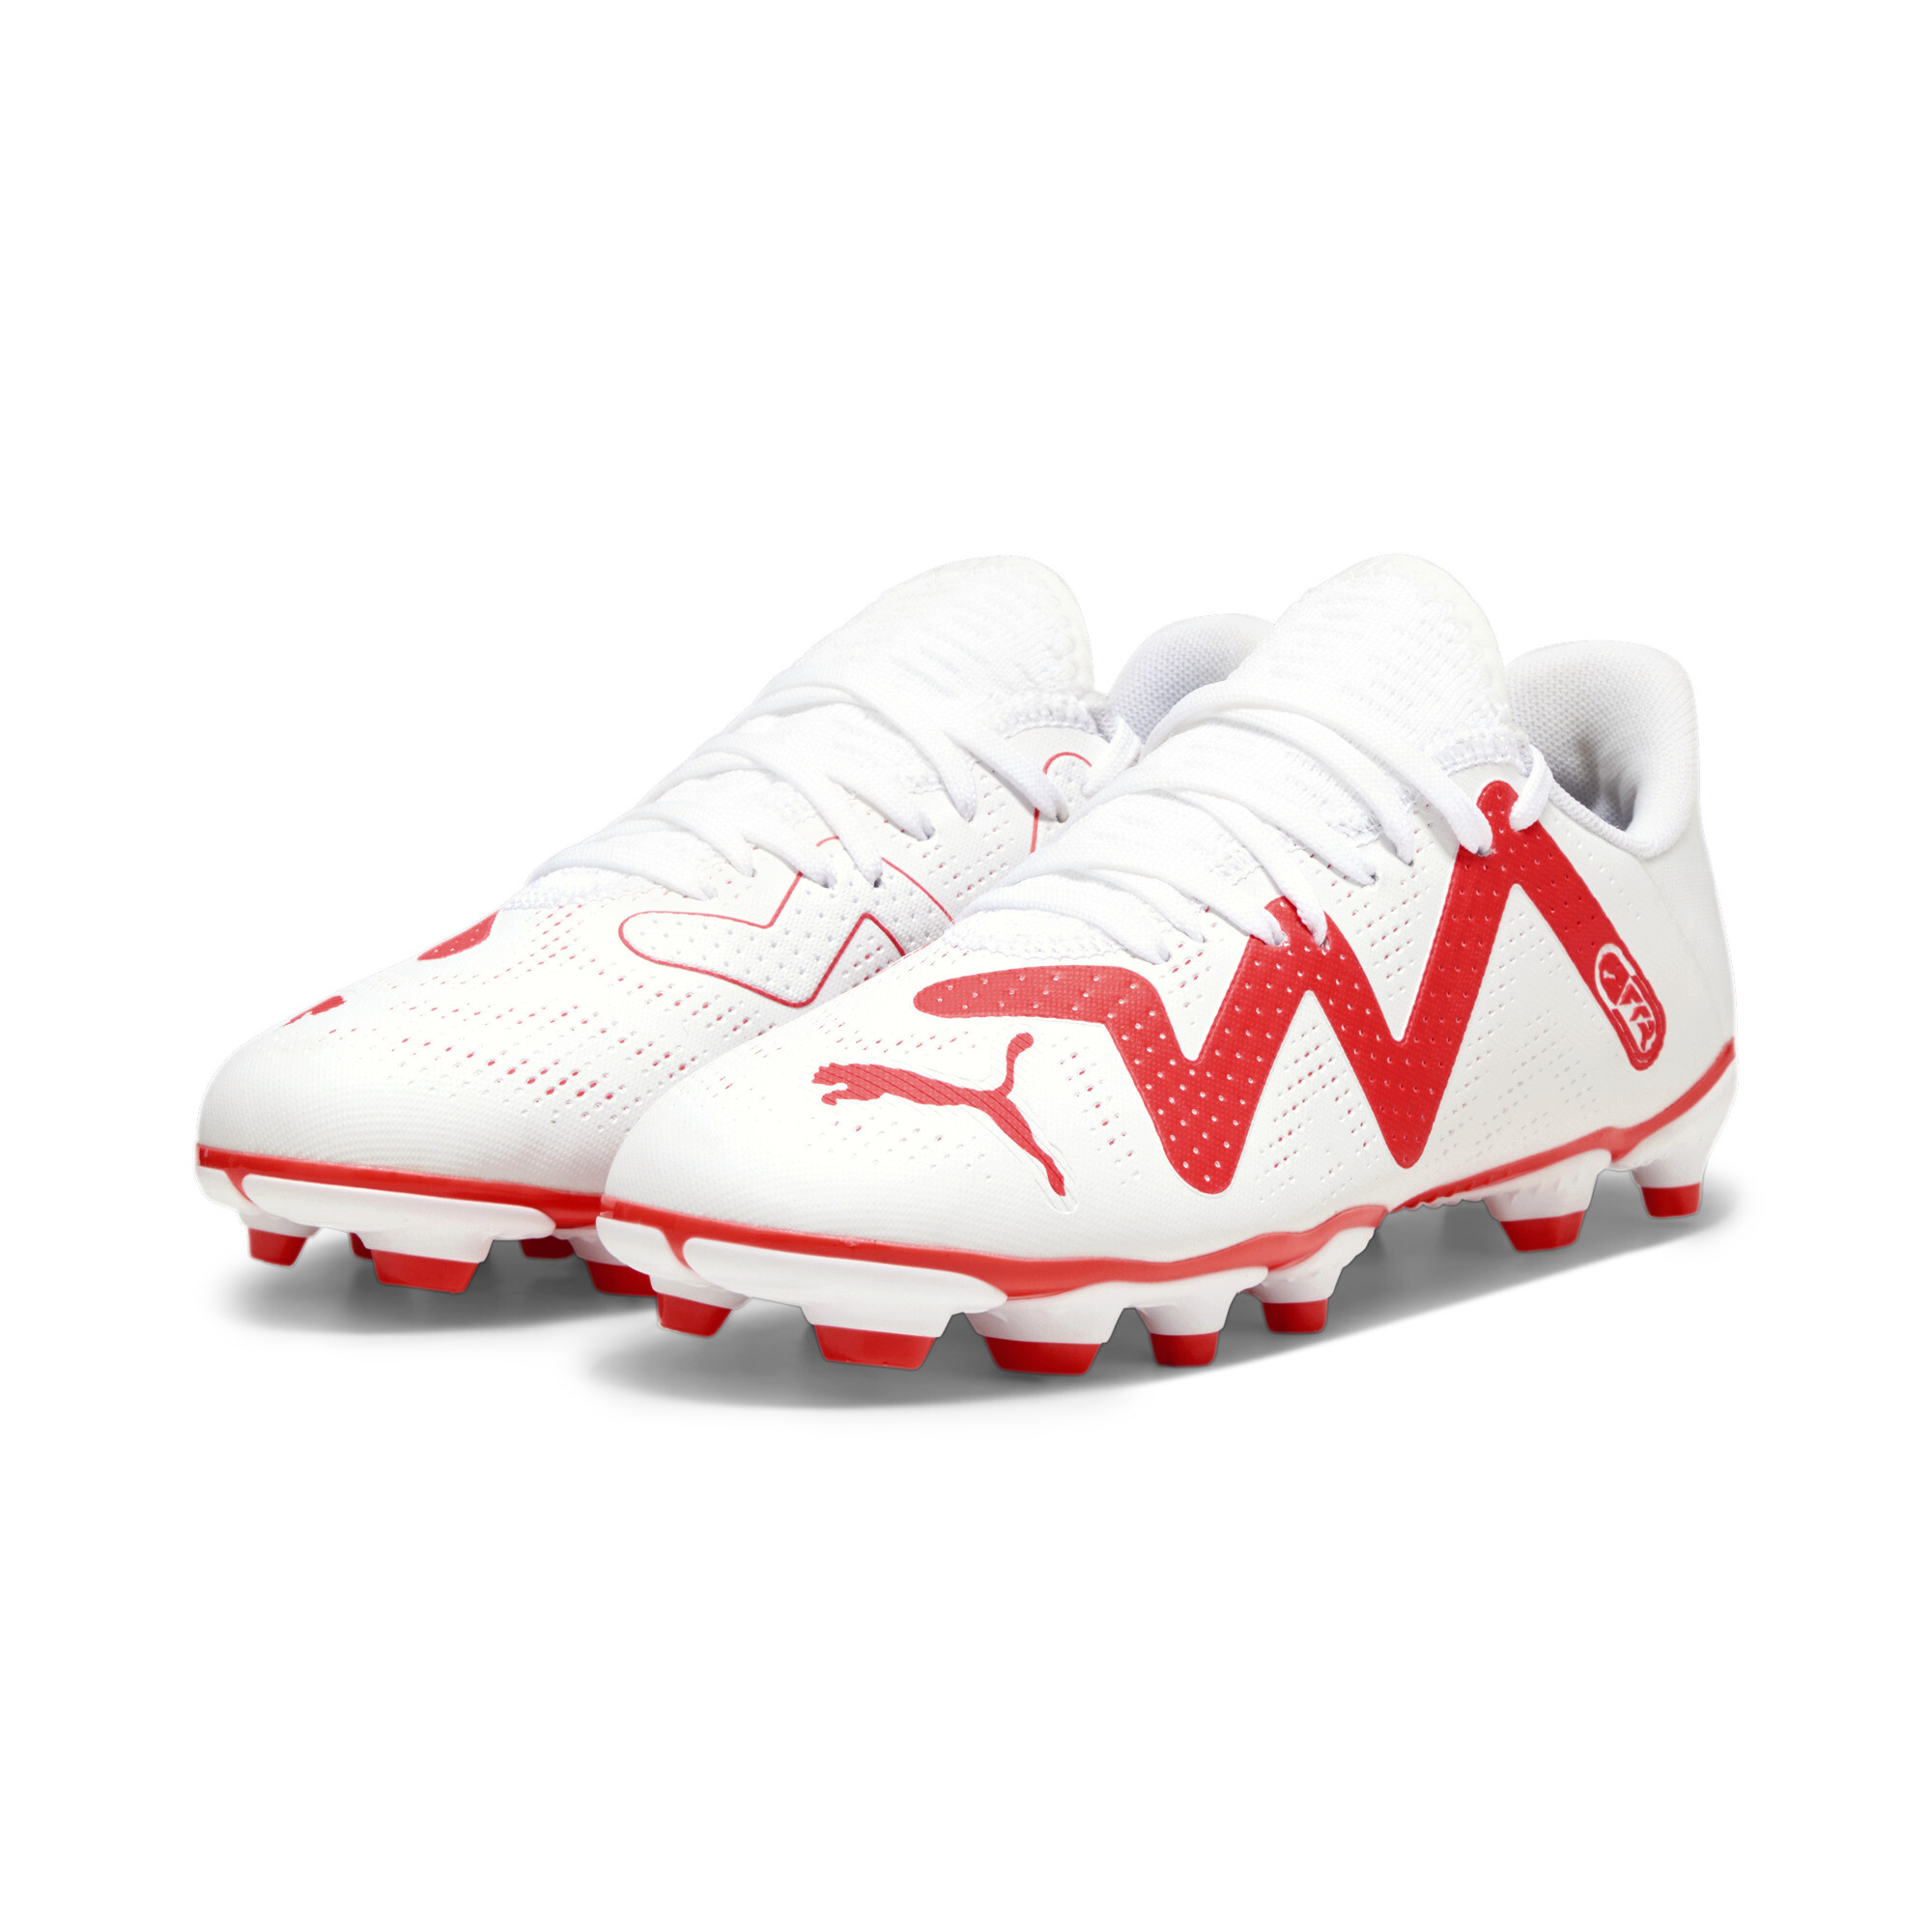 Puma FUTURE PLAY FG/AG Youth Football Boots, White, Size 30, Shoes